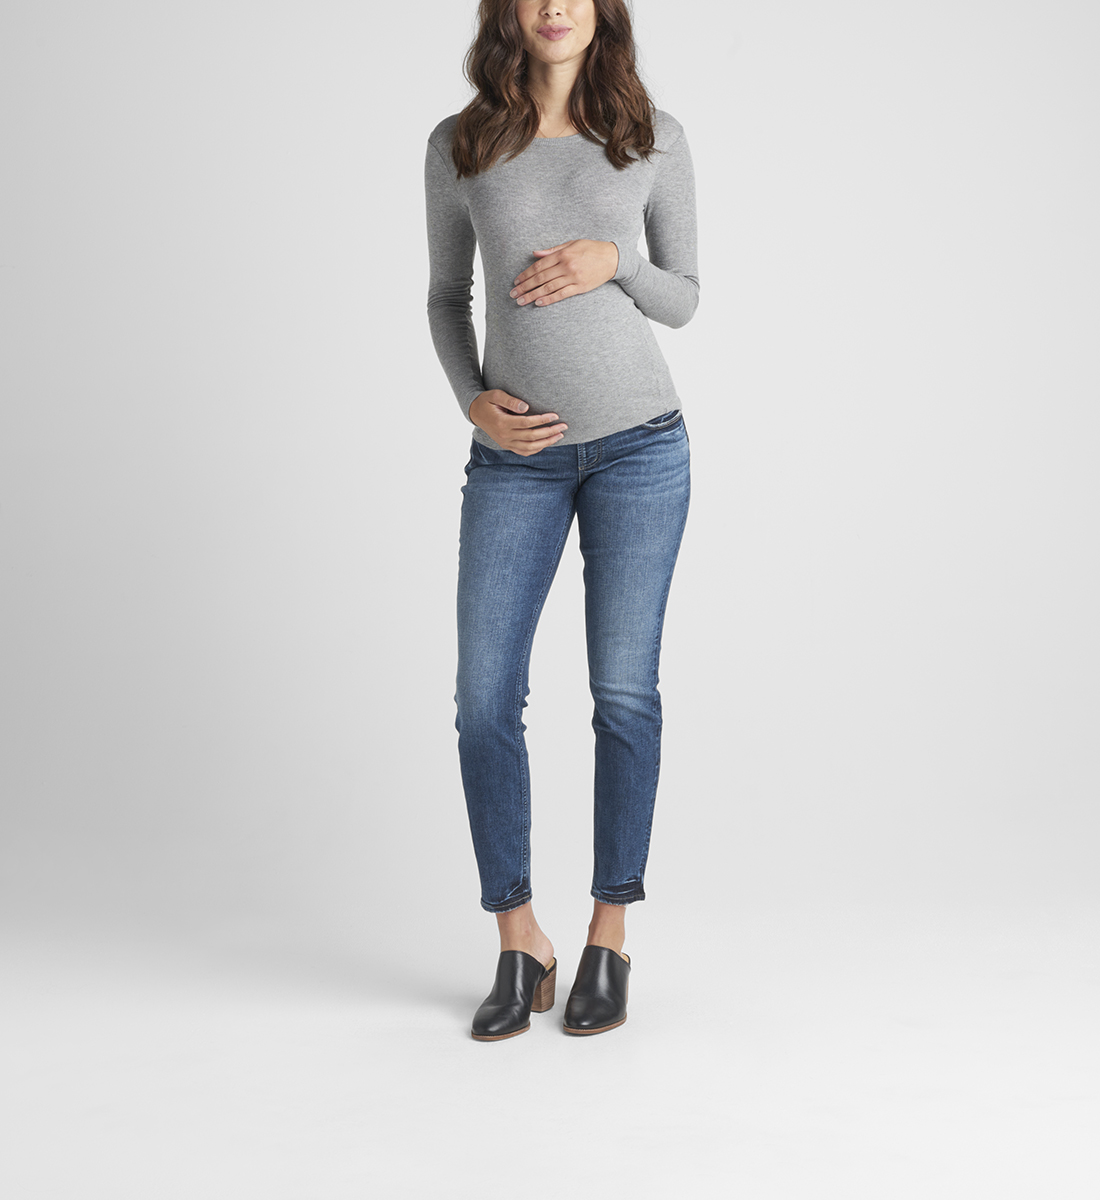 Silver Jeans Elyse Mid Rise Skinny Maternity Jeans